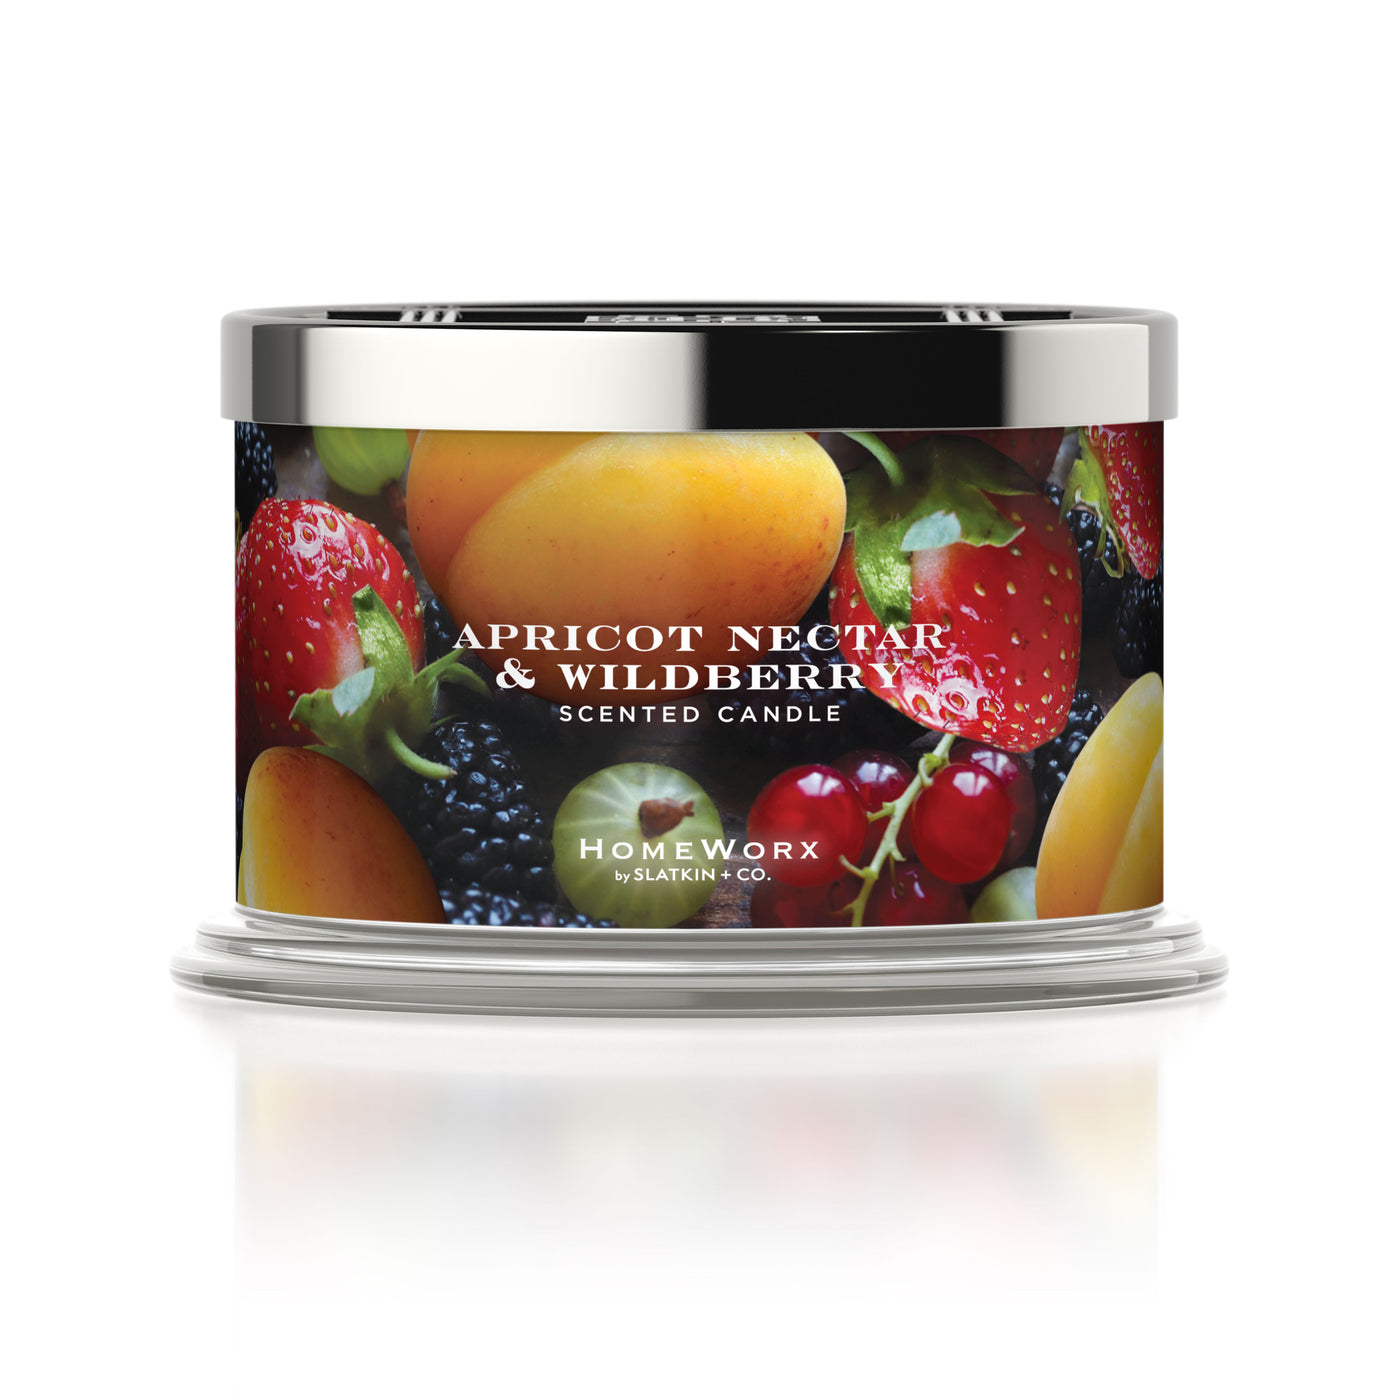 Apricot Nectar & Wildberry Candle